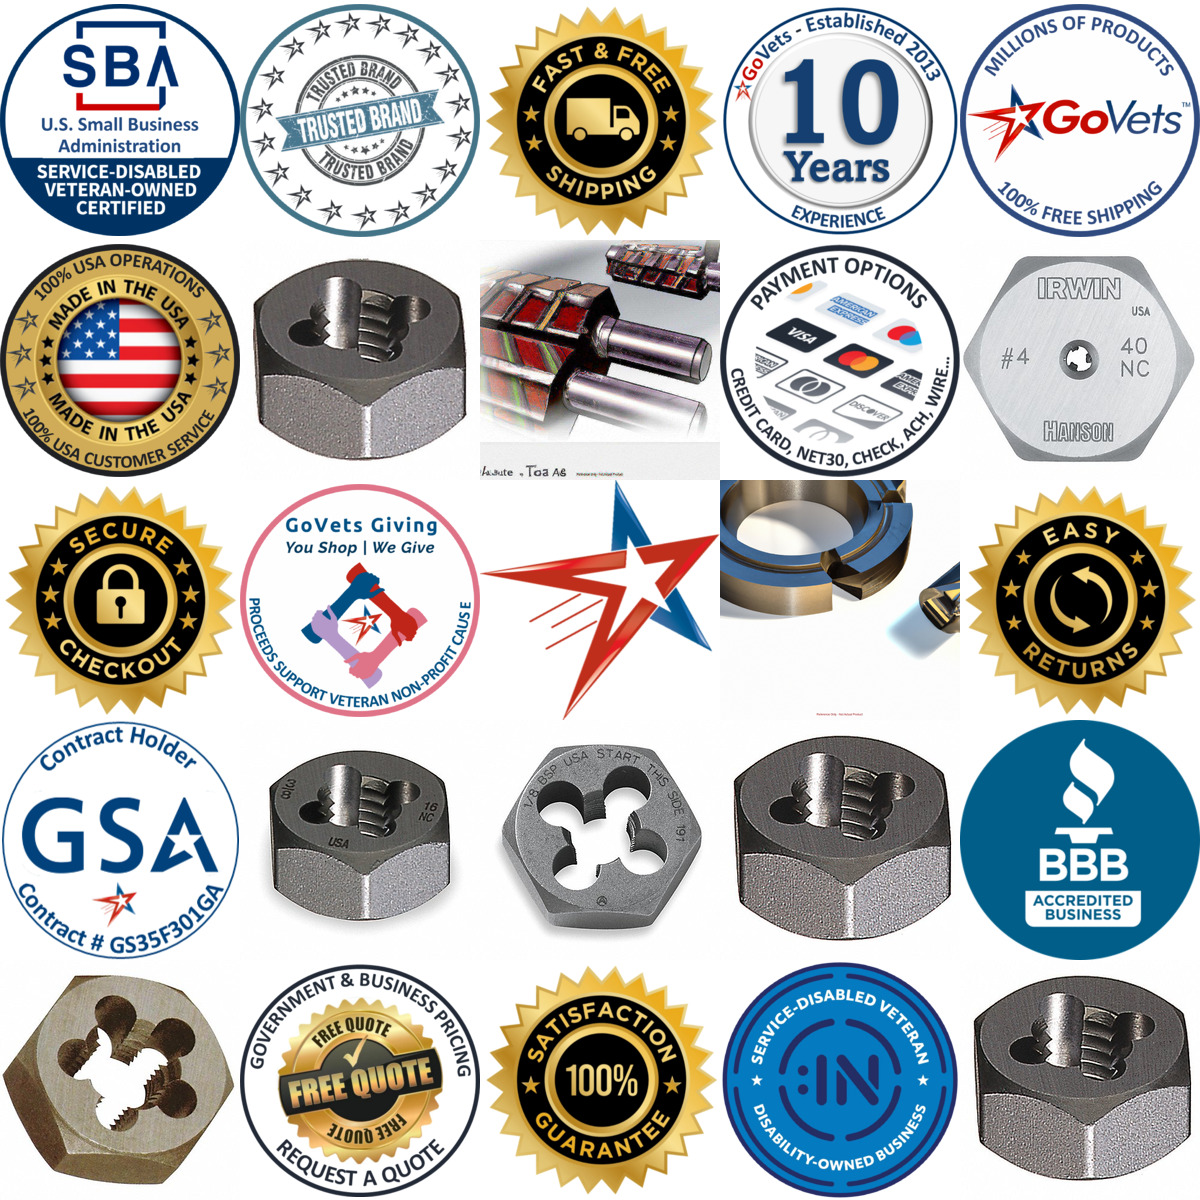 A selection of Hex Threading Dies products on GoVets